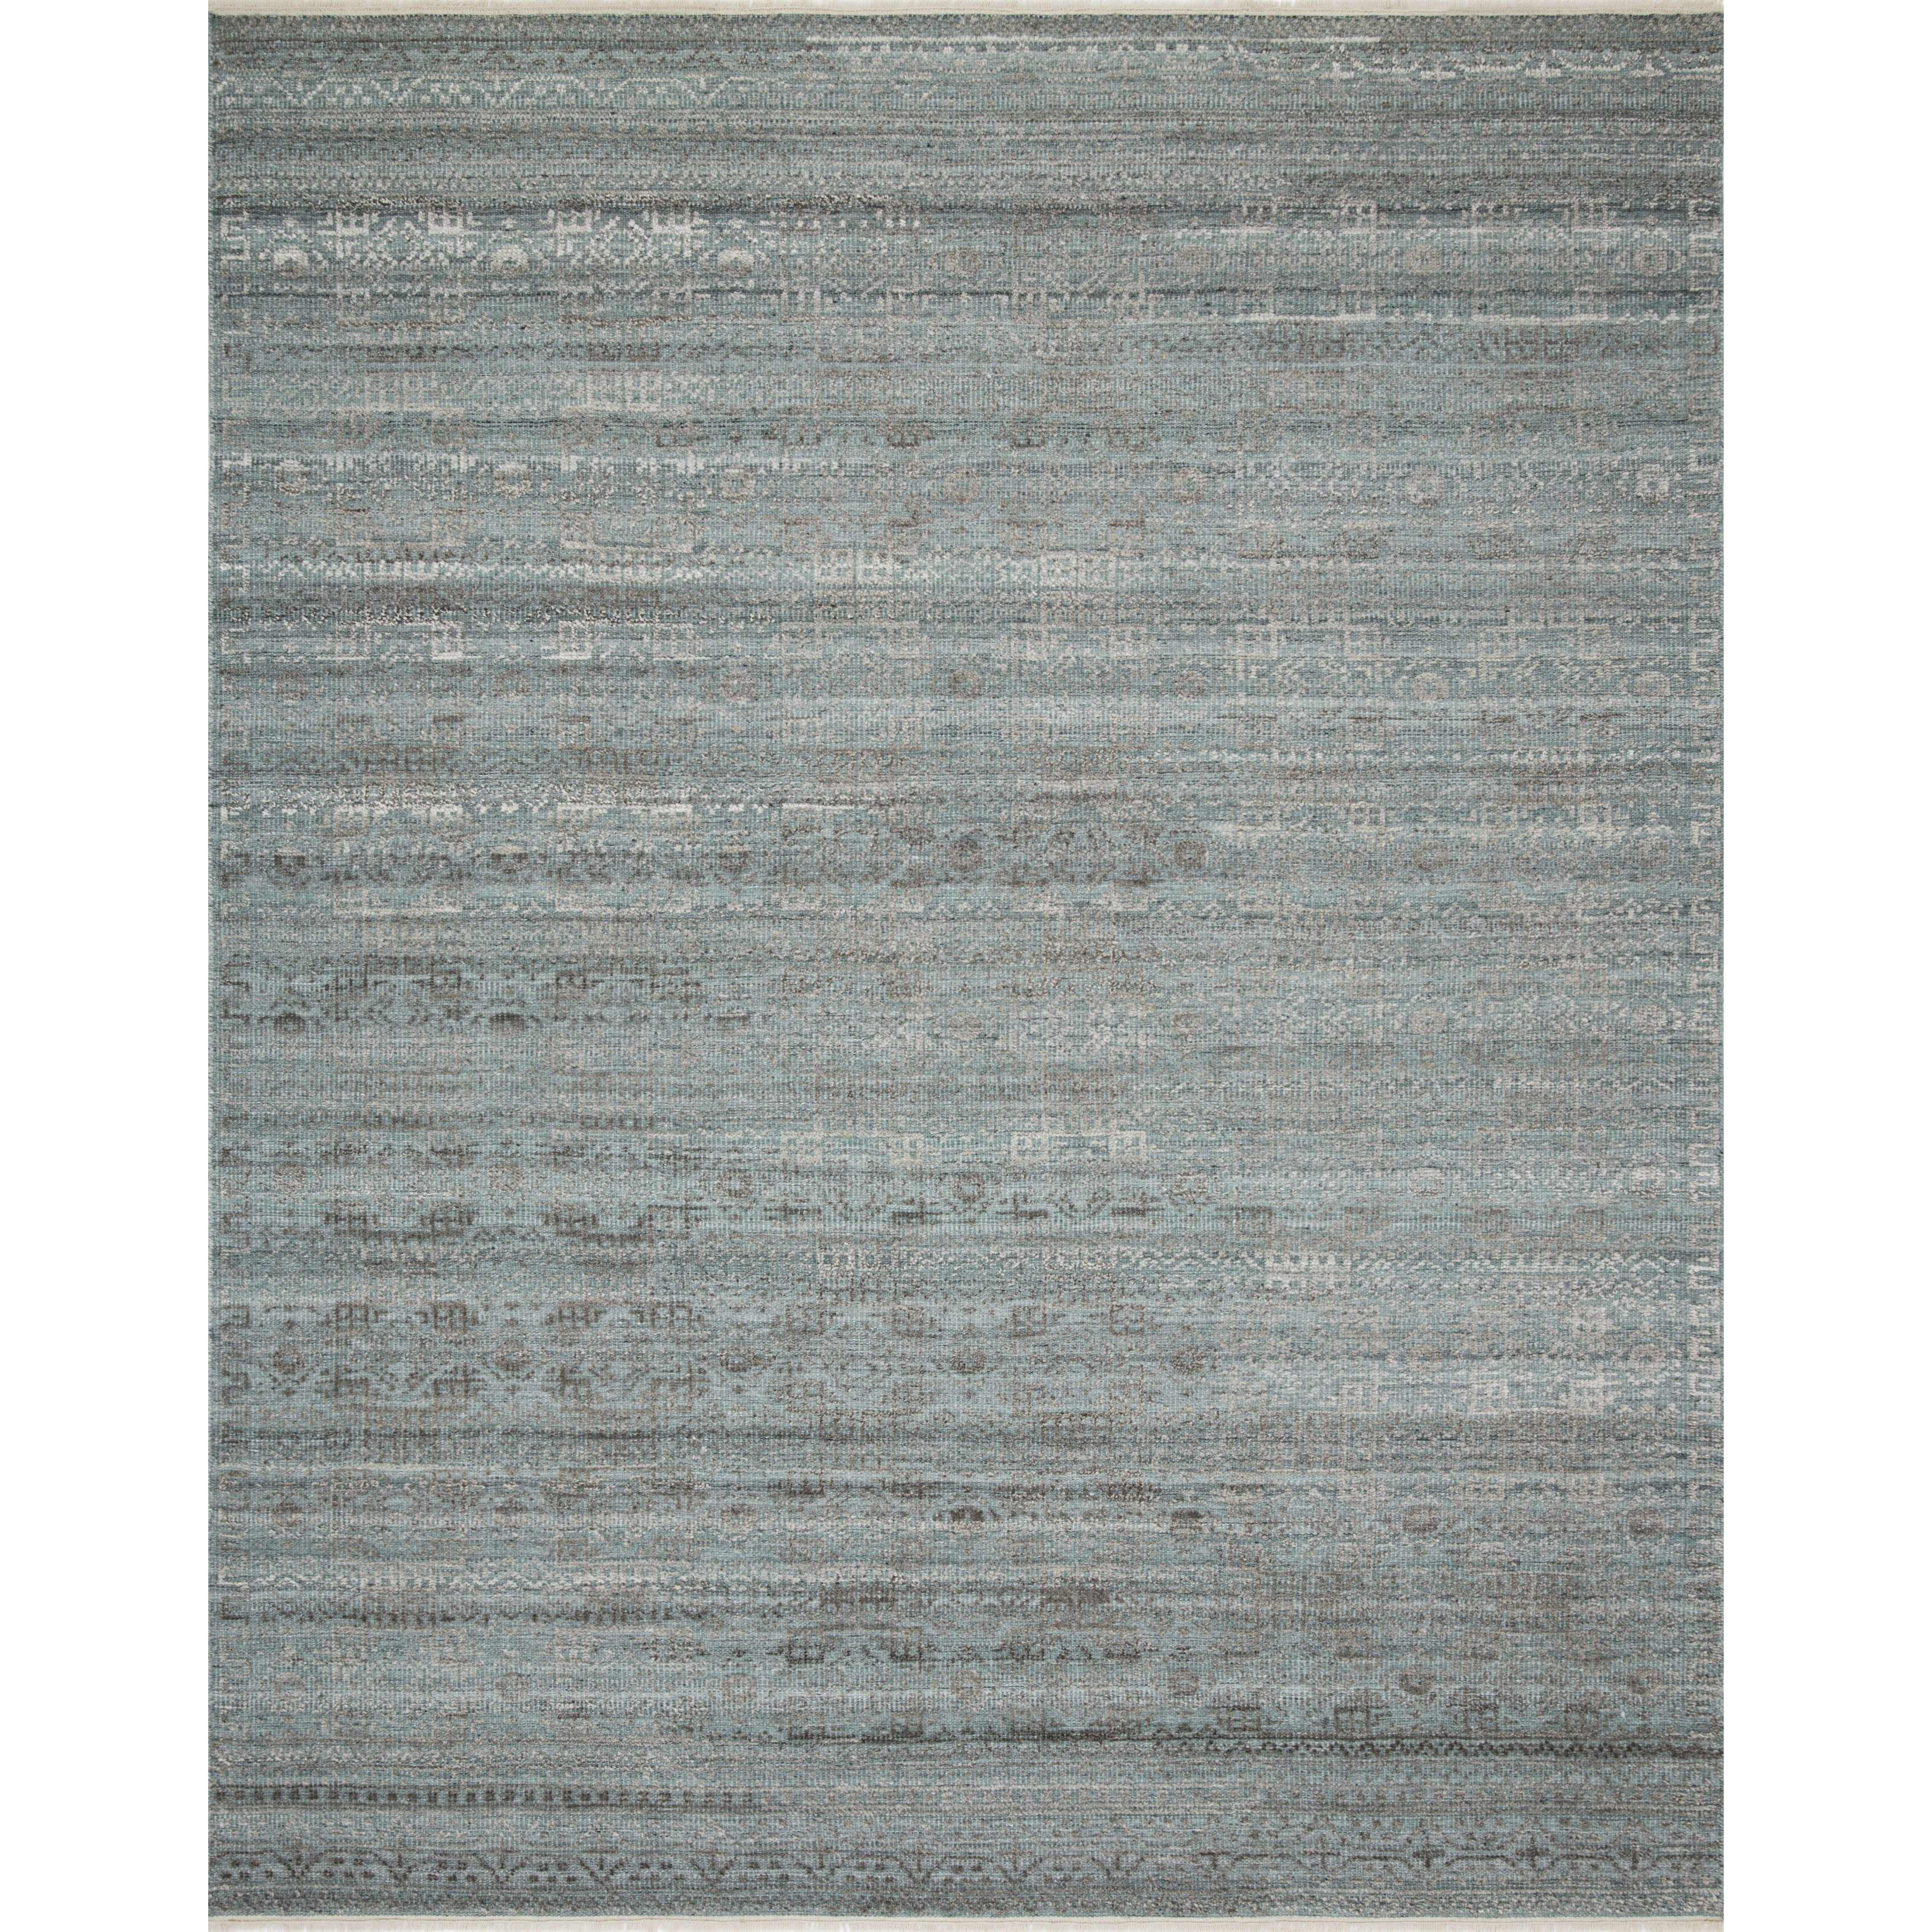 Both timeless and modern, the Idris Ocean/Smoke area rug from Loloi is meticulously hand-knotted in colors of blue and grey. The tonal series features an elevated texture, accentuating the detailed pattern. The Idris Ocean/Smoke rug, also known as ID-03 Ocean/Smoke, is hand-knotted of 70% Viscose and 30% Wool.